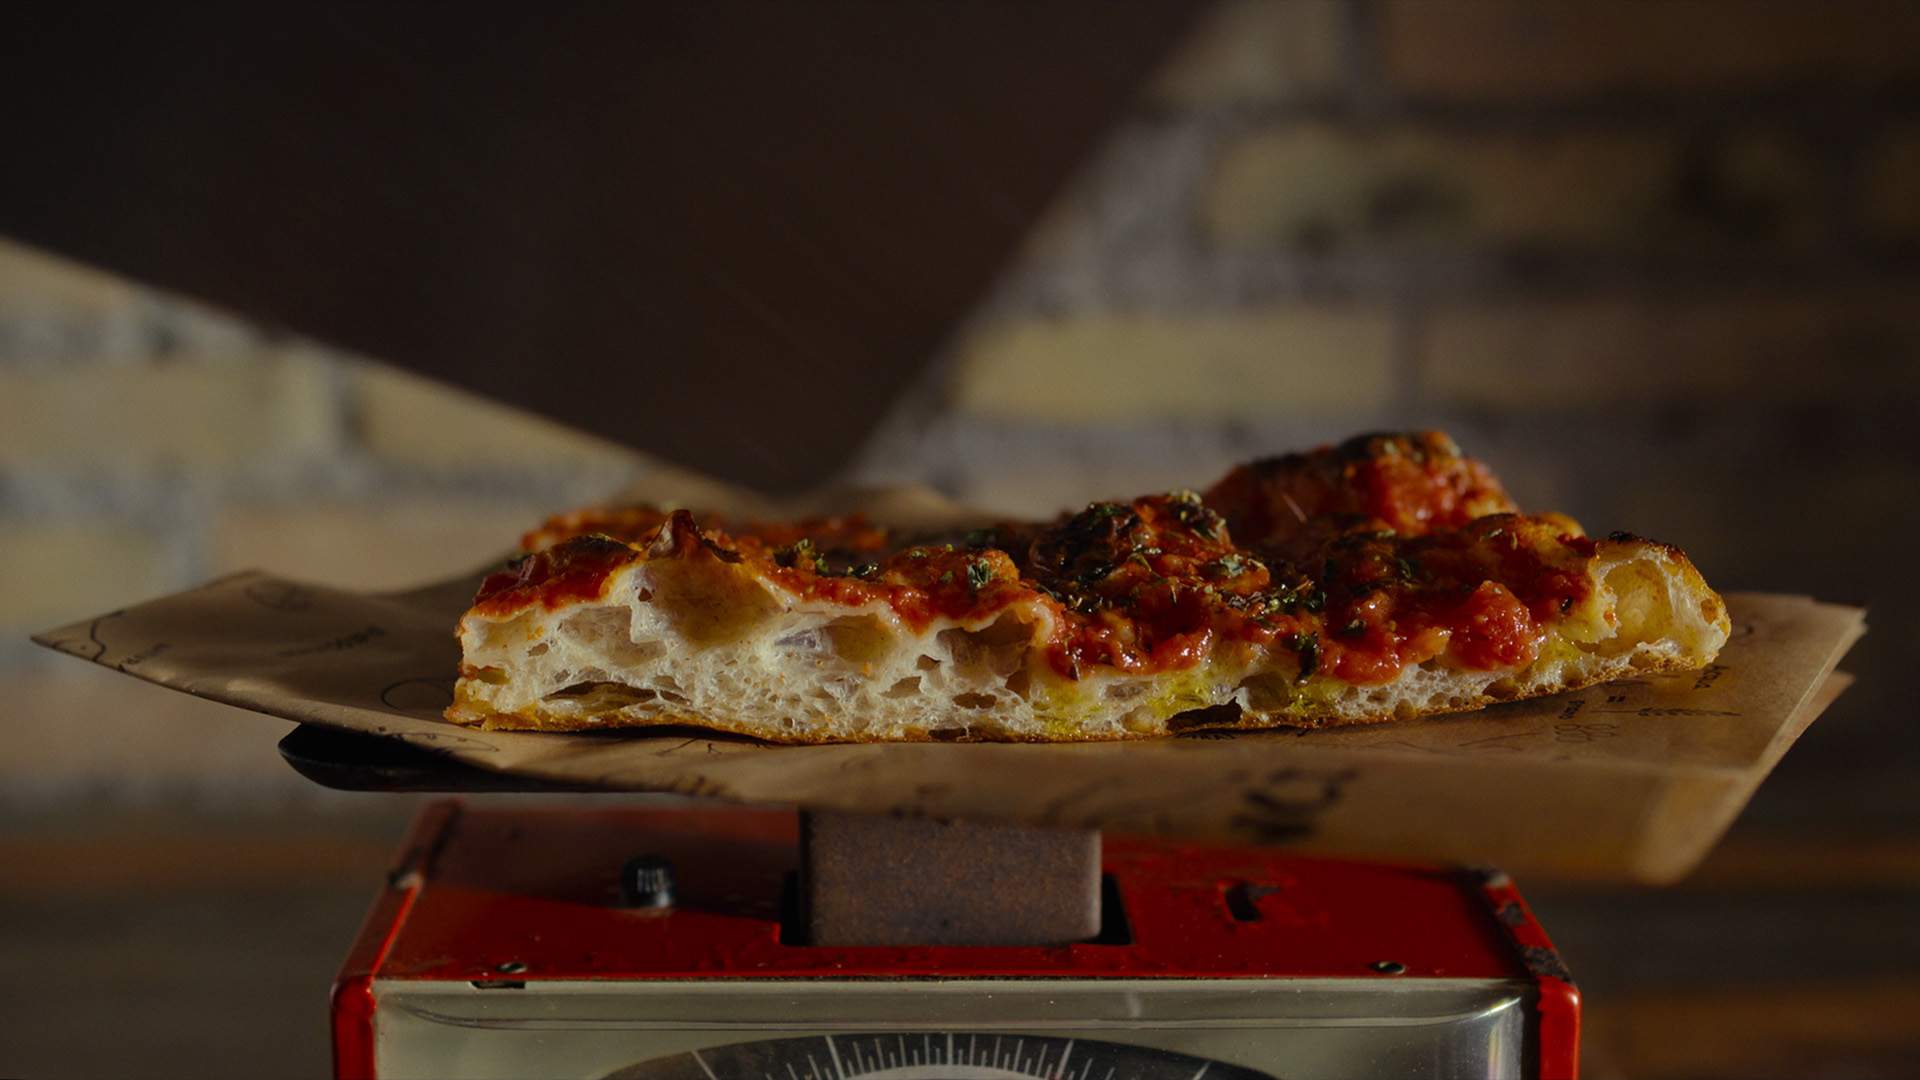 Netflix Is Serving Up a New Season of 'Chef's Table' That's All About Pizza